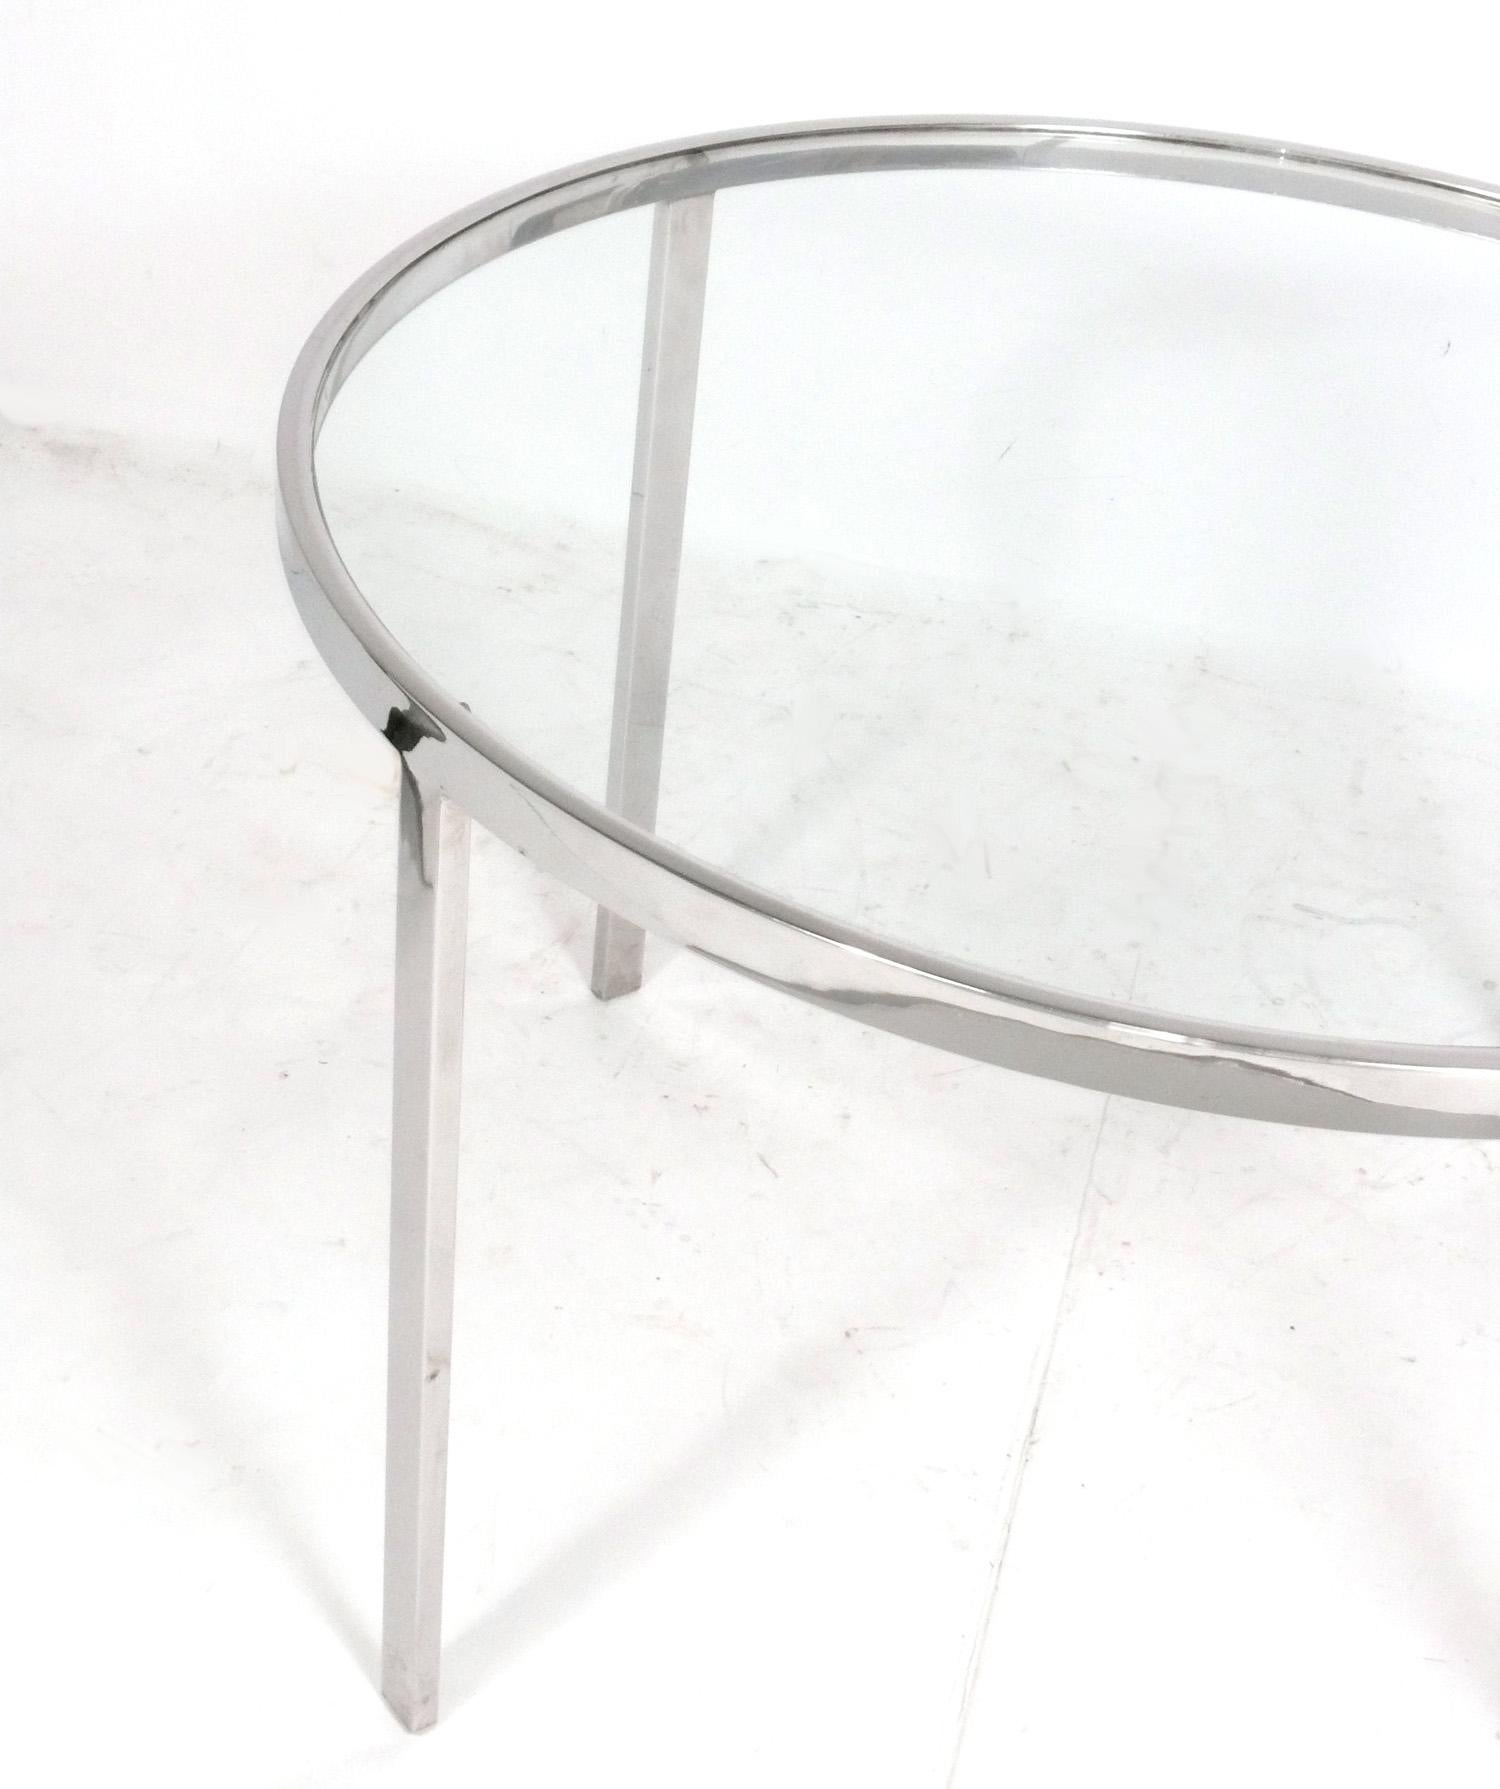 American Clean Lined Chrome Dining Table by Milo Baughman for DIA 42